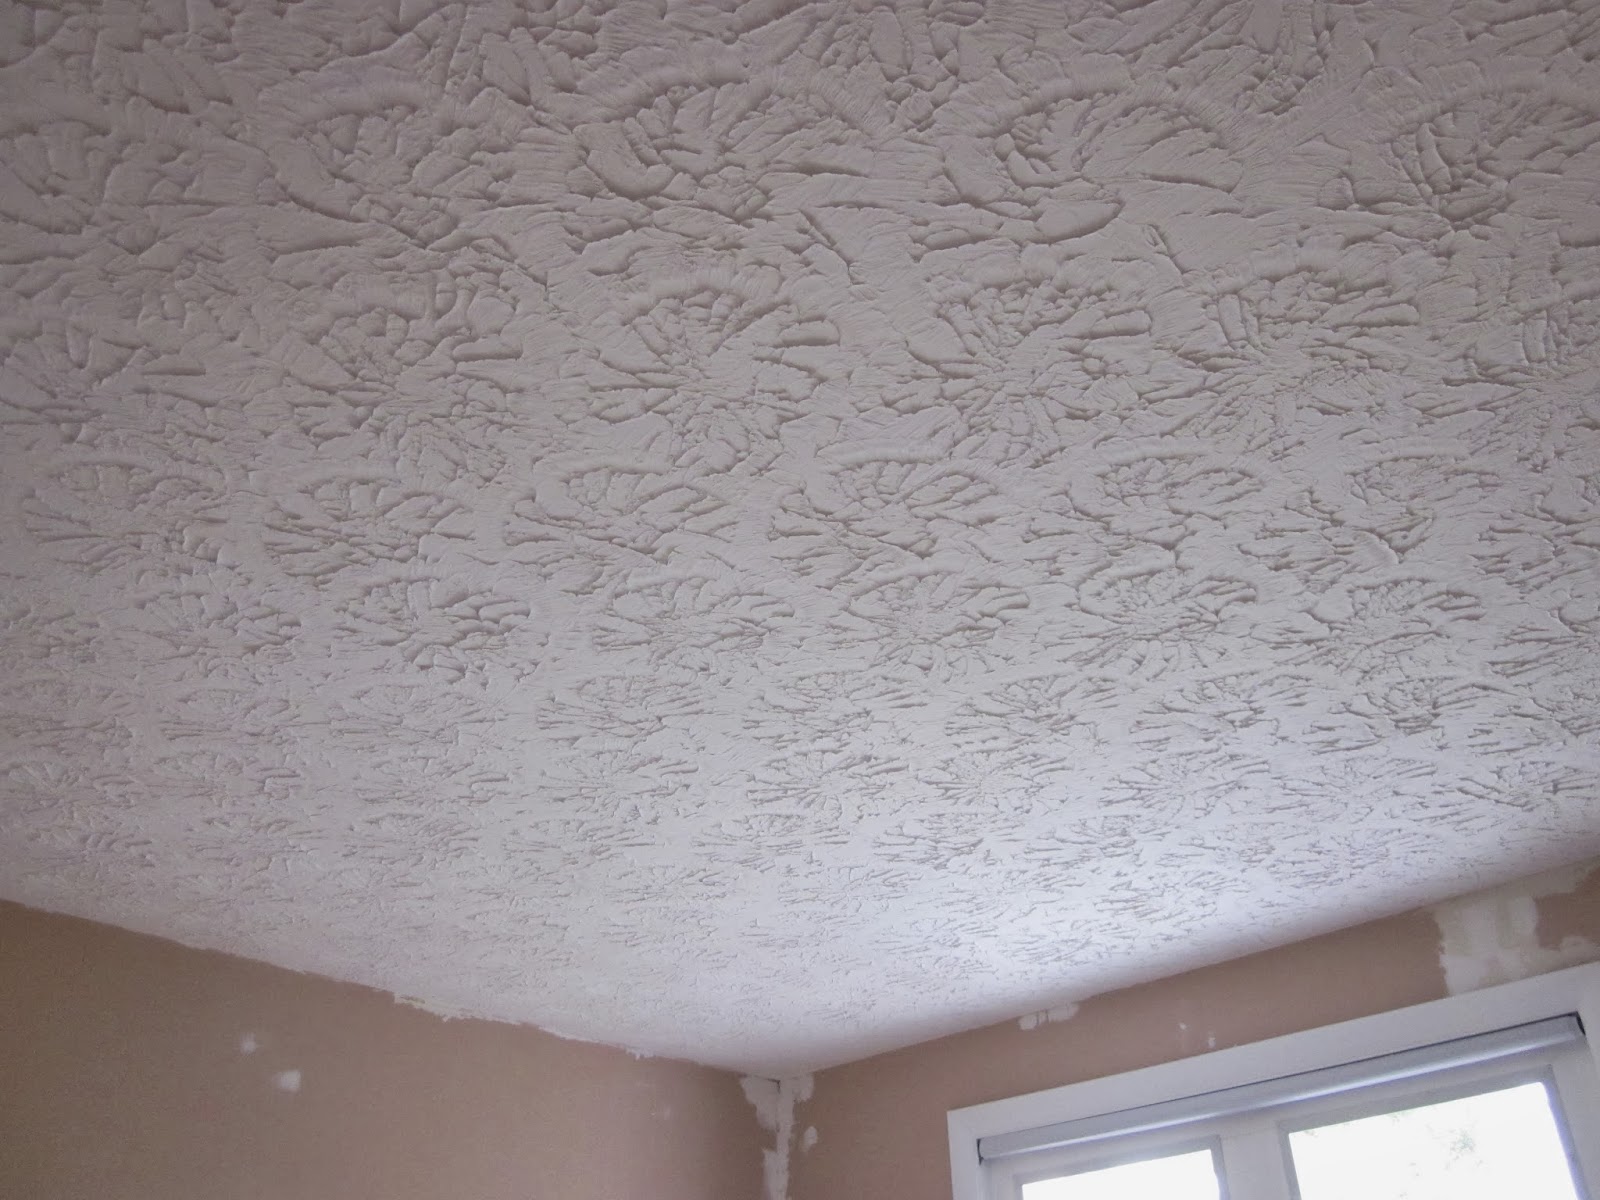 Bonnieprojects Removing Textured Ceilings